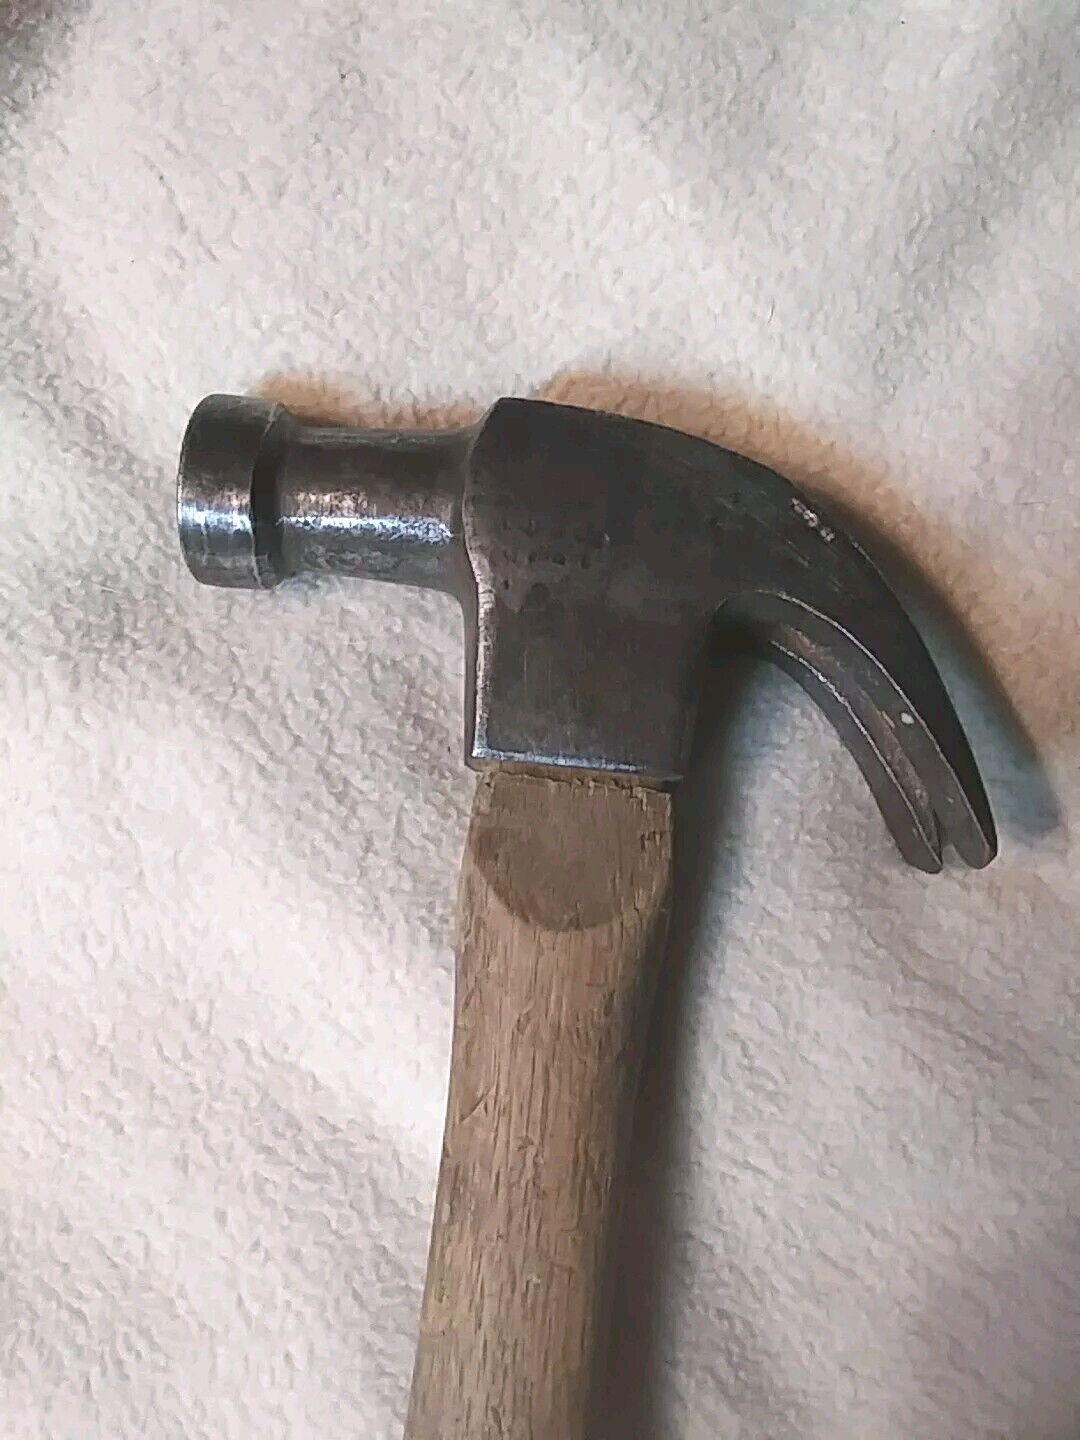 Vintage PEXTO Claw Hammer 13 3/4 long😎👍